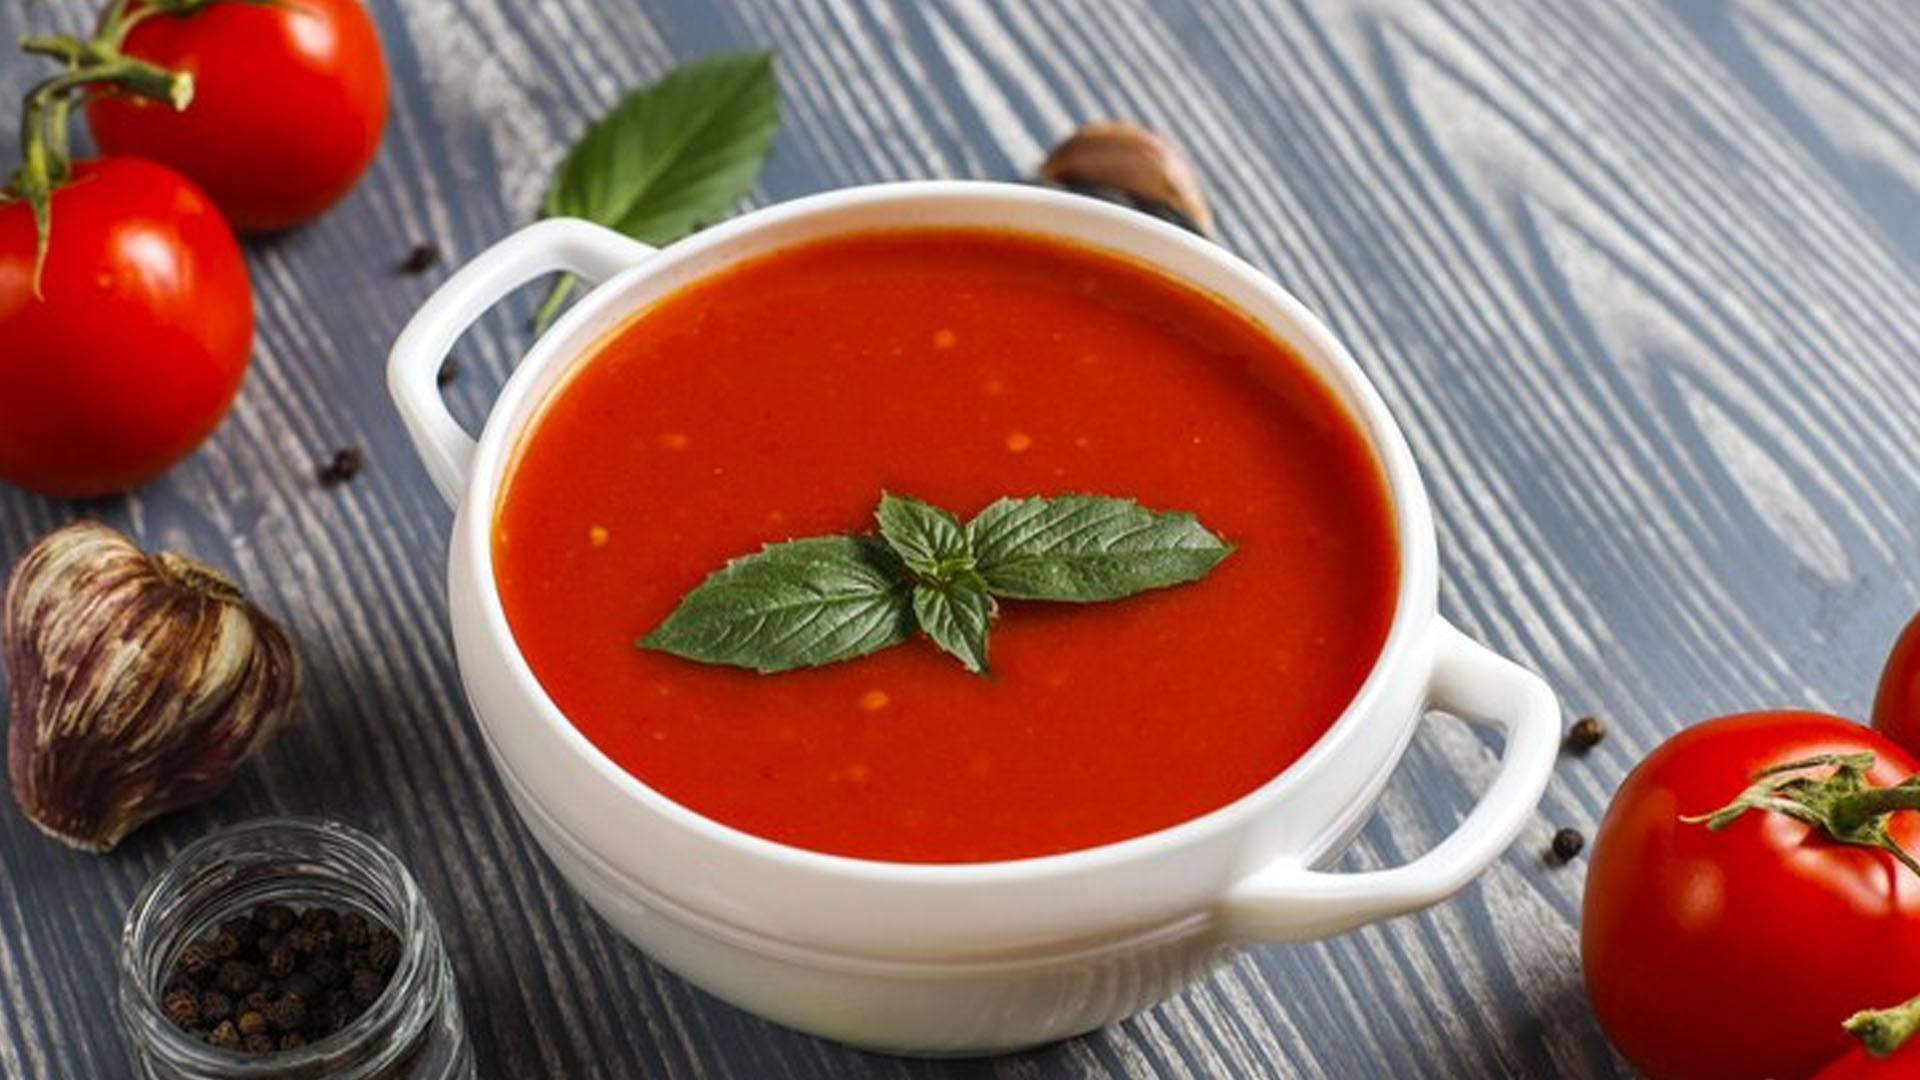 What are the Health Benefits of Eating Tomato Soup Daily?